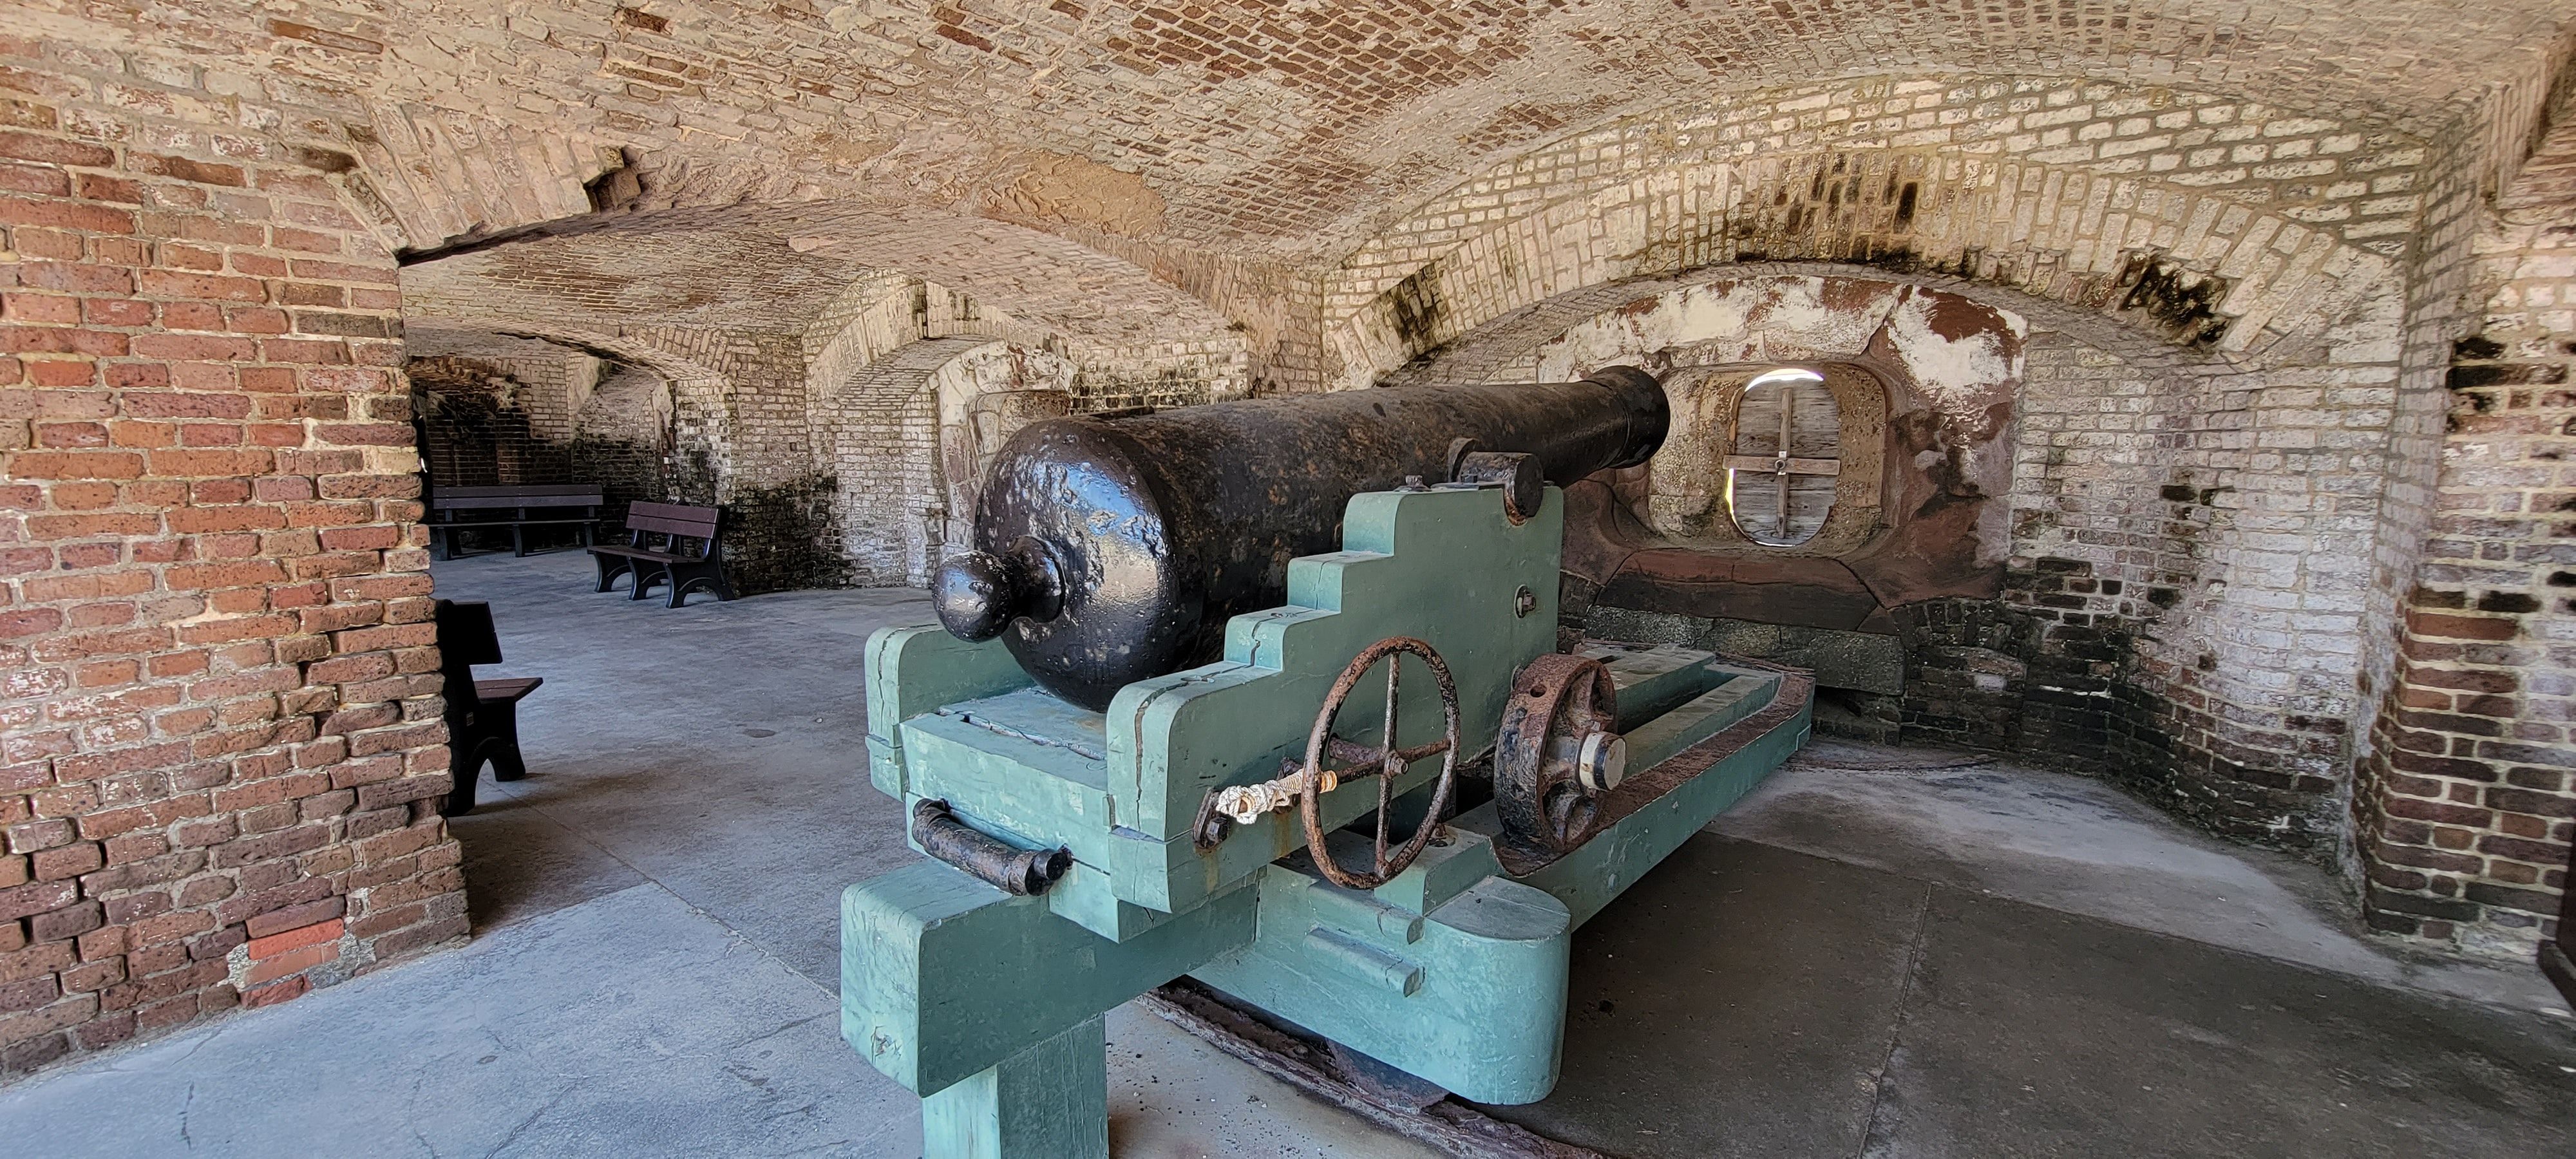 Canon inside Fort Sumter National Monument in Charleston, South Carolina